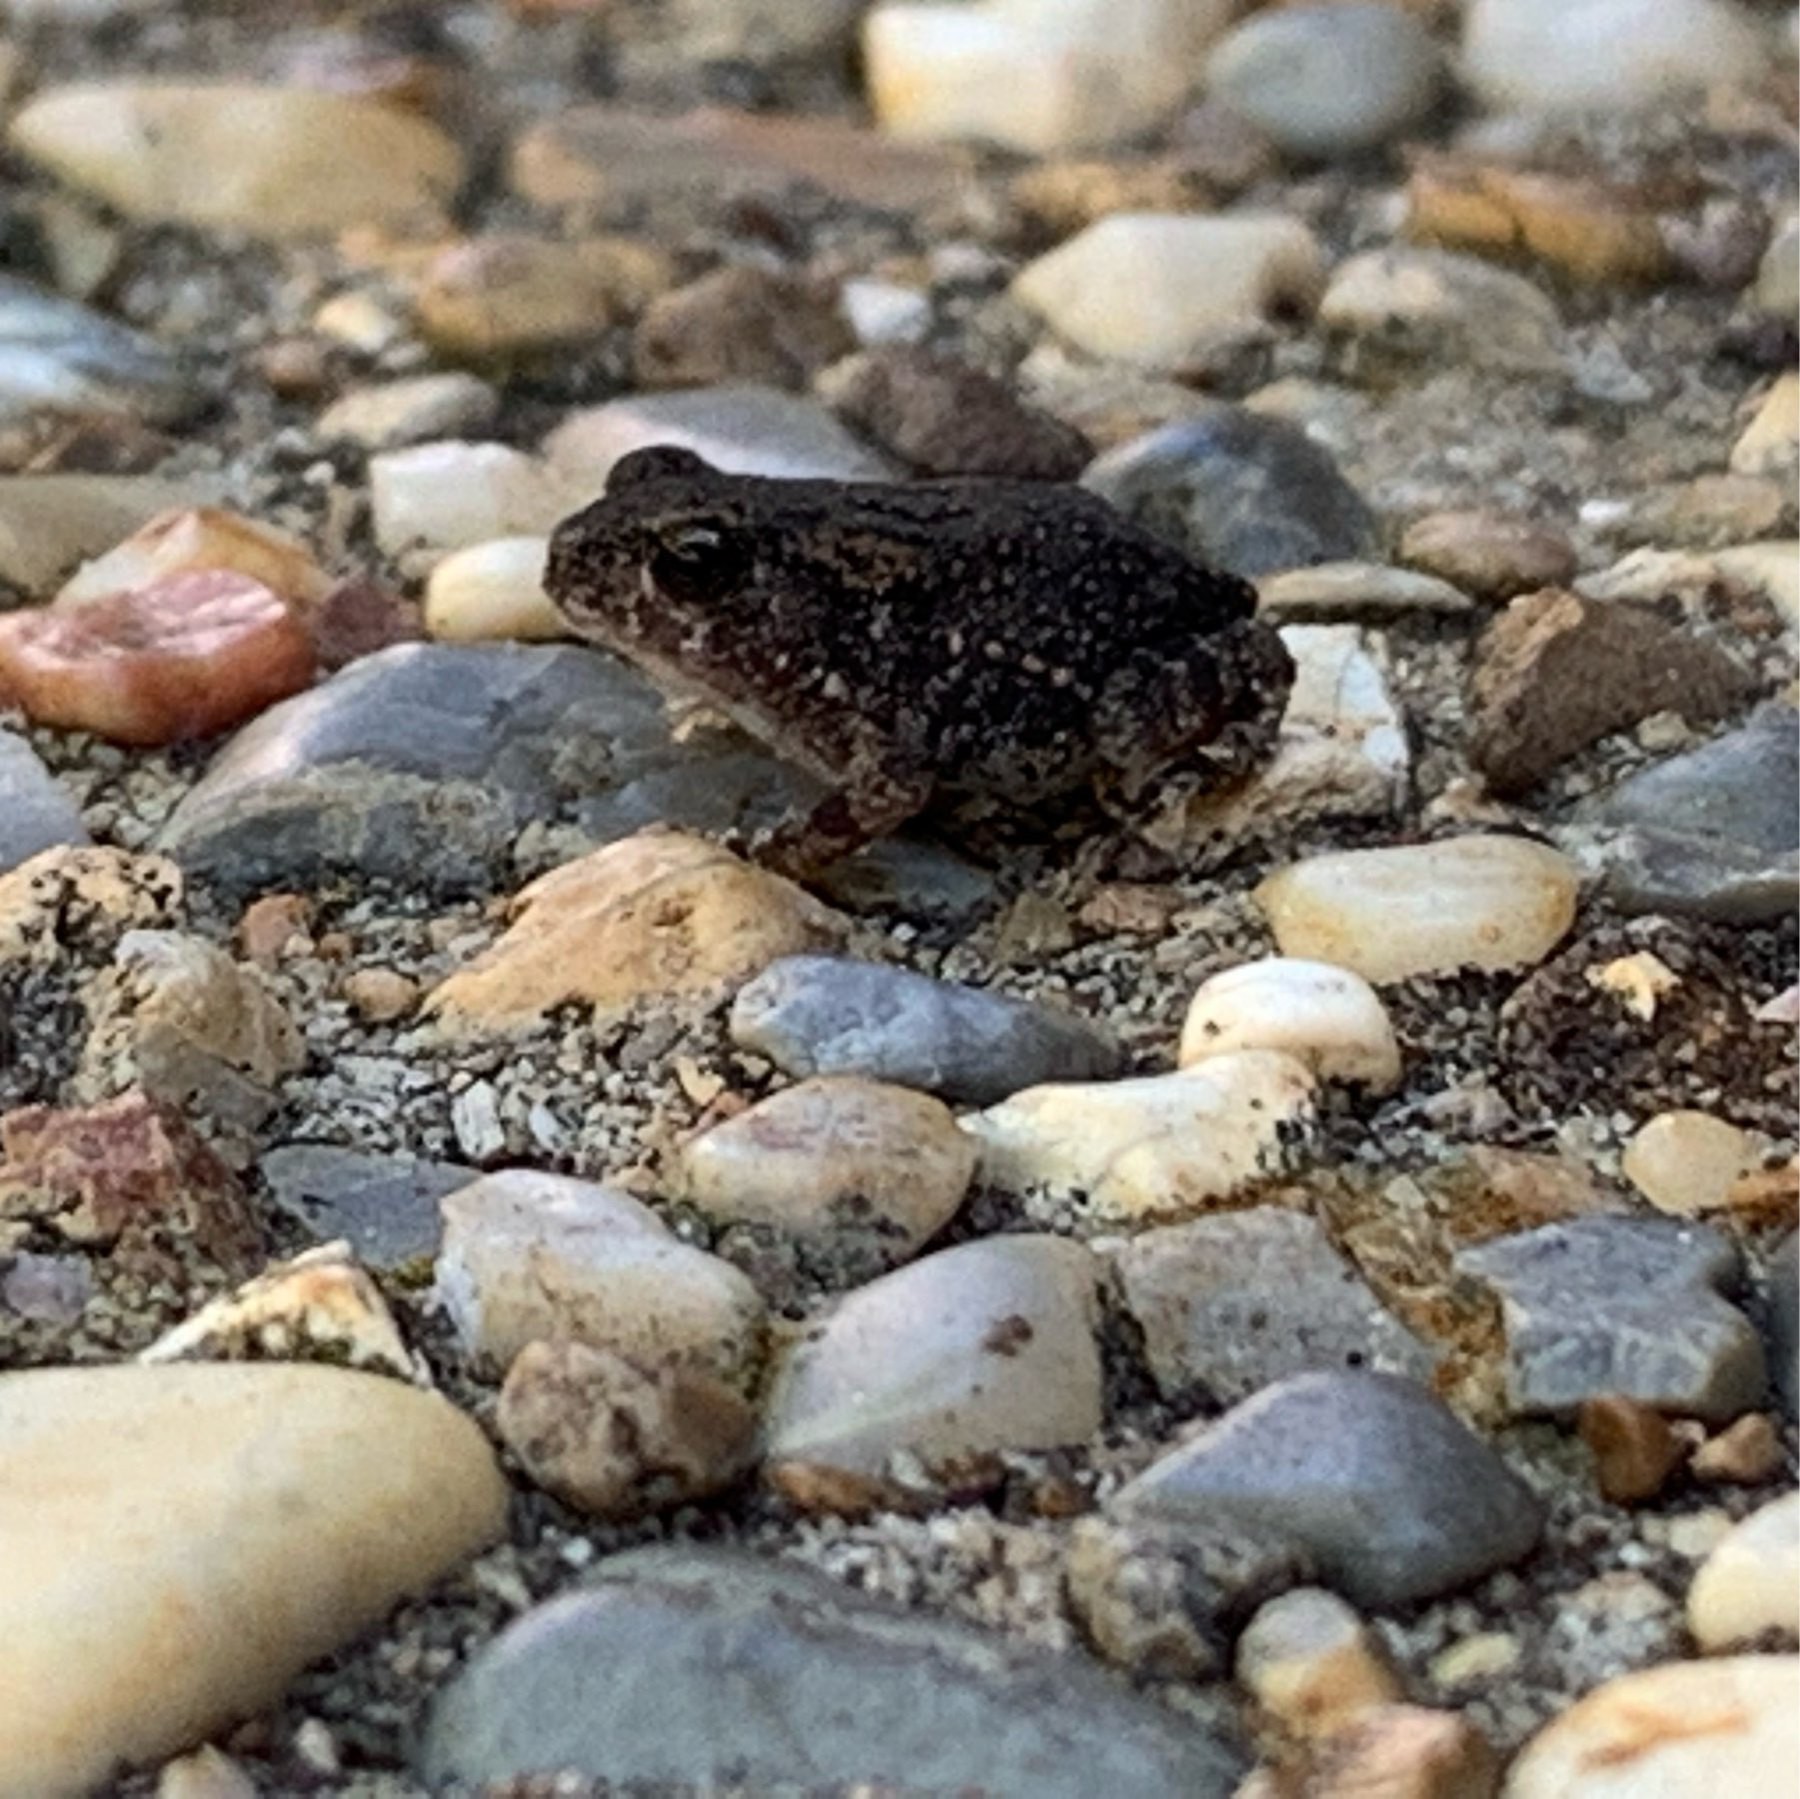 A tiny toad on a driveway